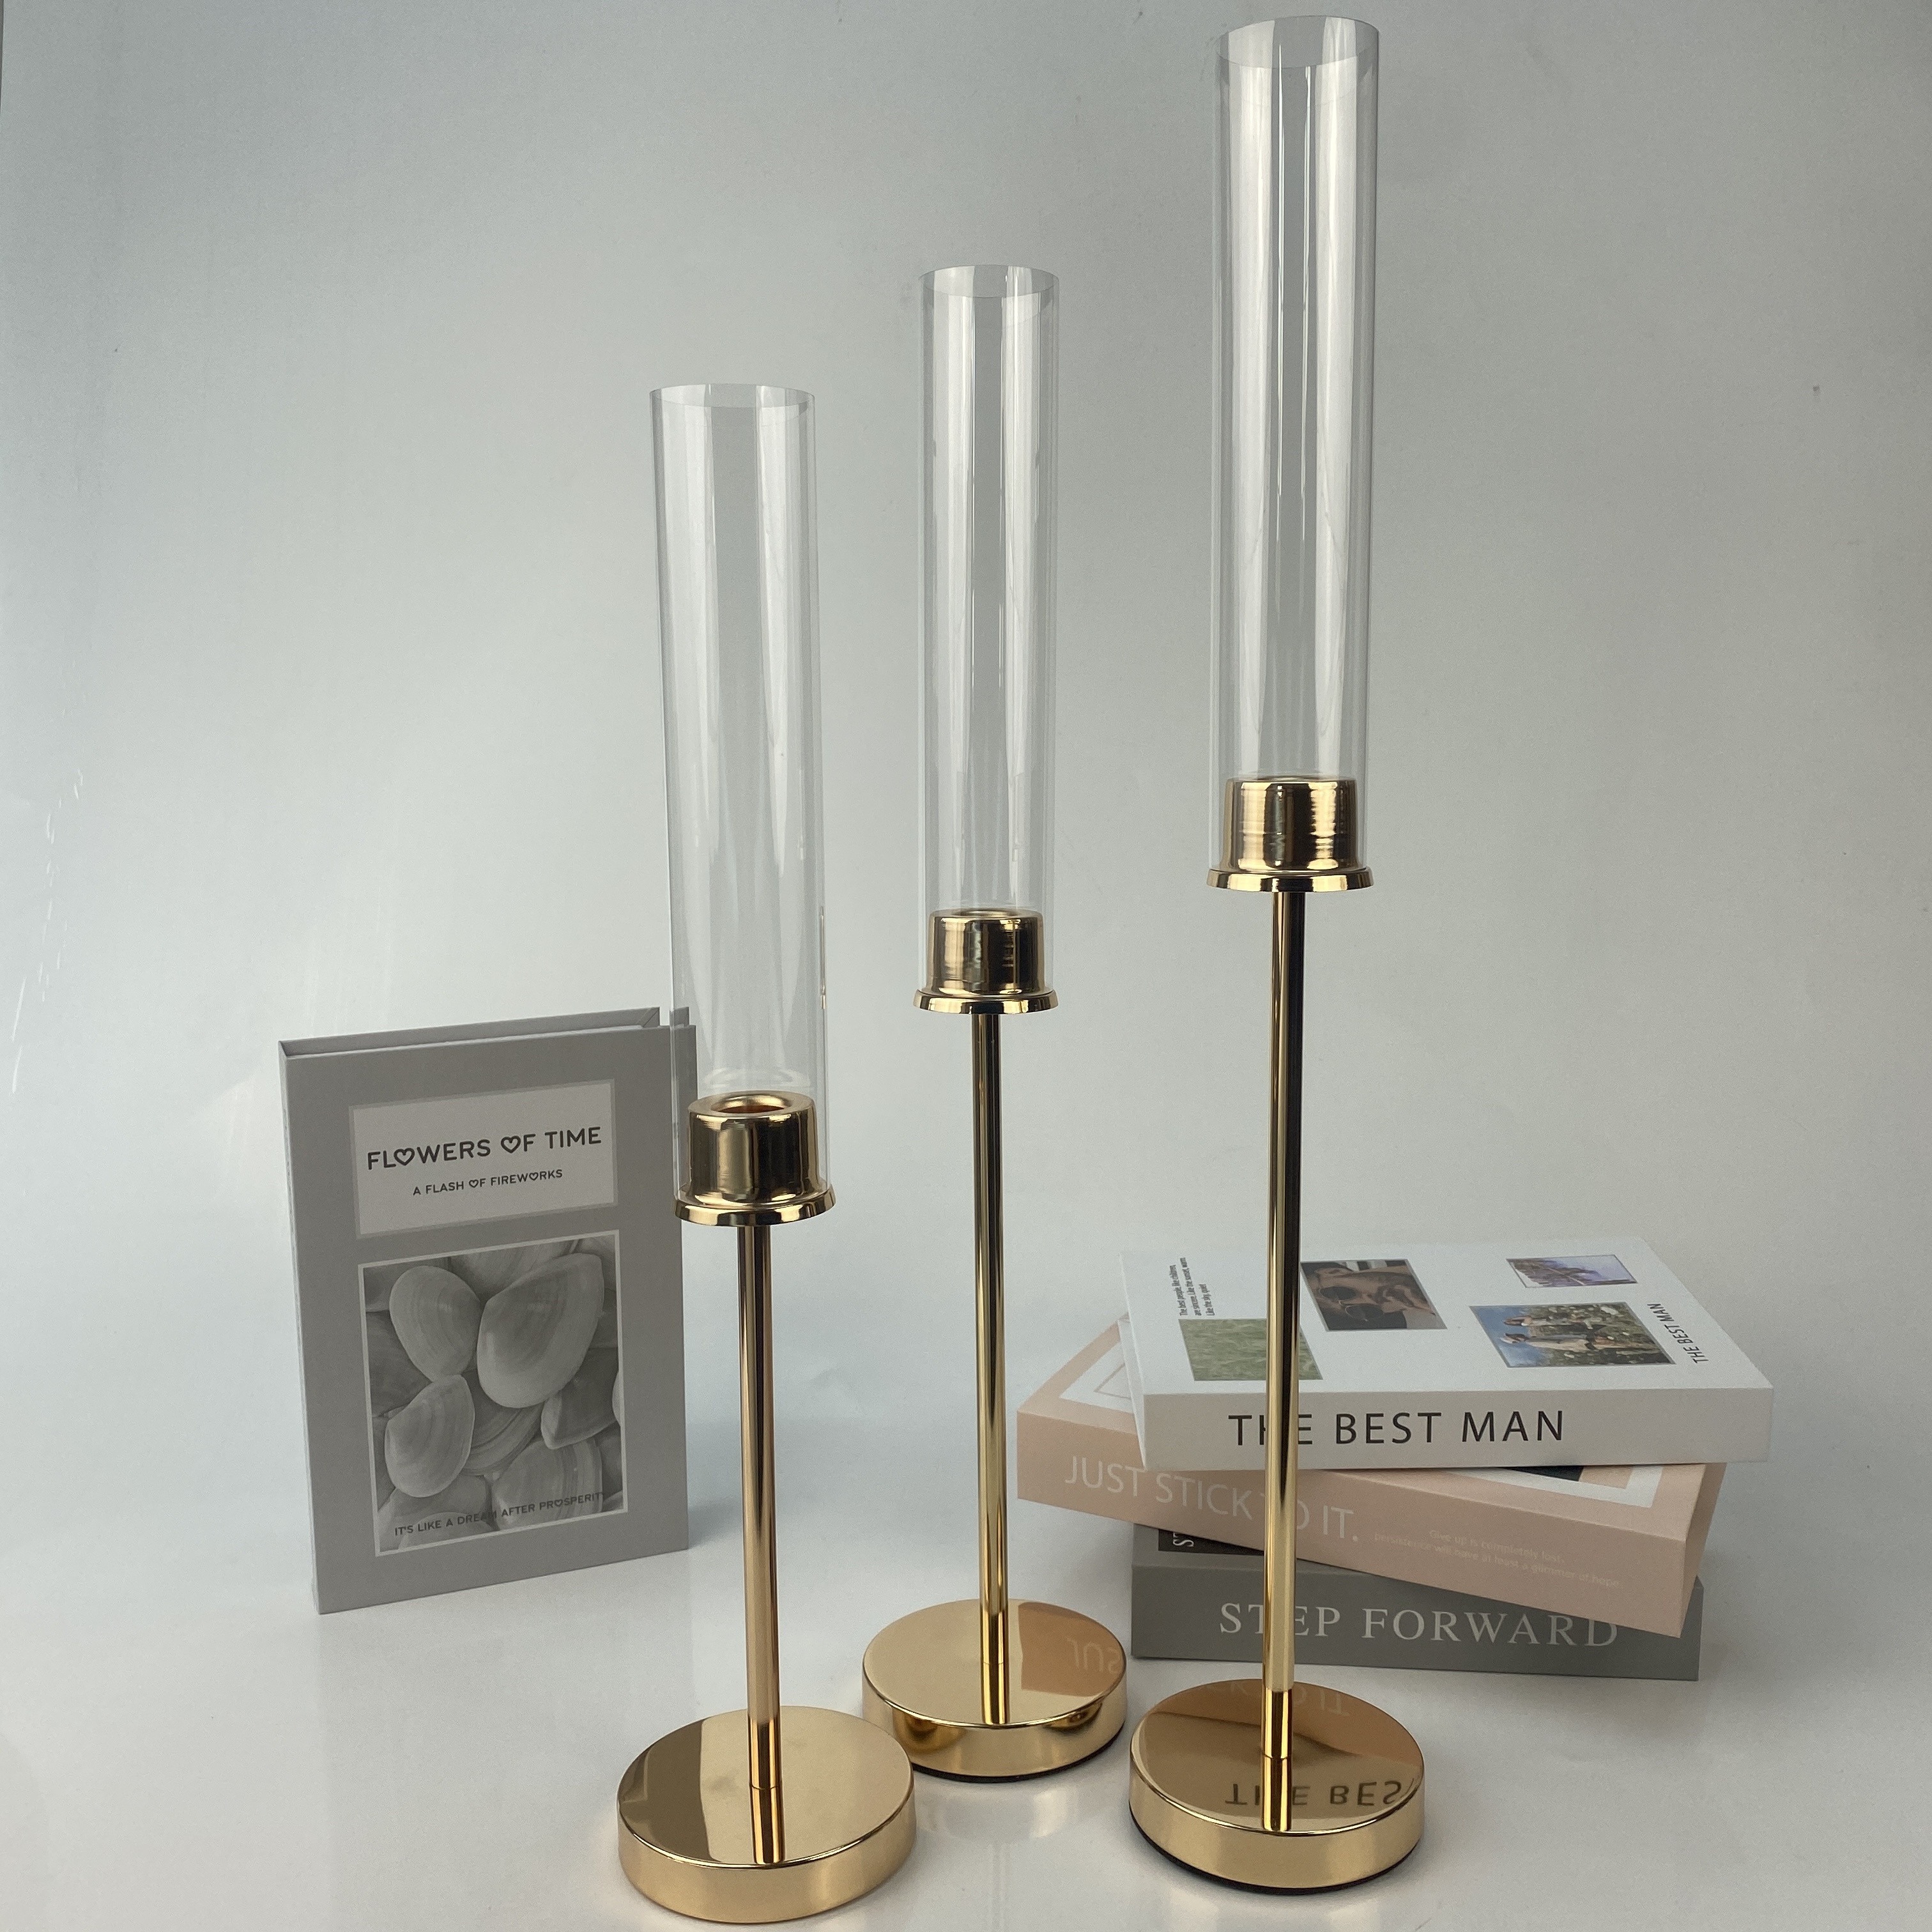 

Set, Candelabra Gold Candle Holders, Tapered Candle Holders With Removable Acrylic, Tall Brass Candelabra, Candelabra Candelabra Long Candle Holders For Dining Table Centerpieces, Home Use